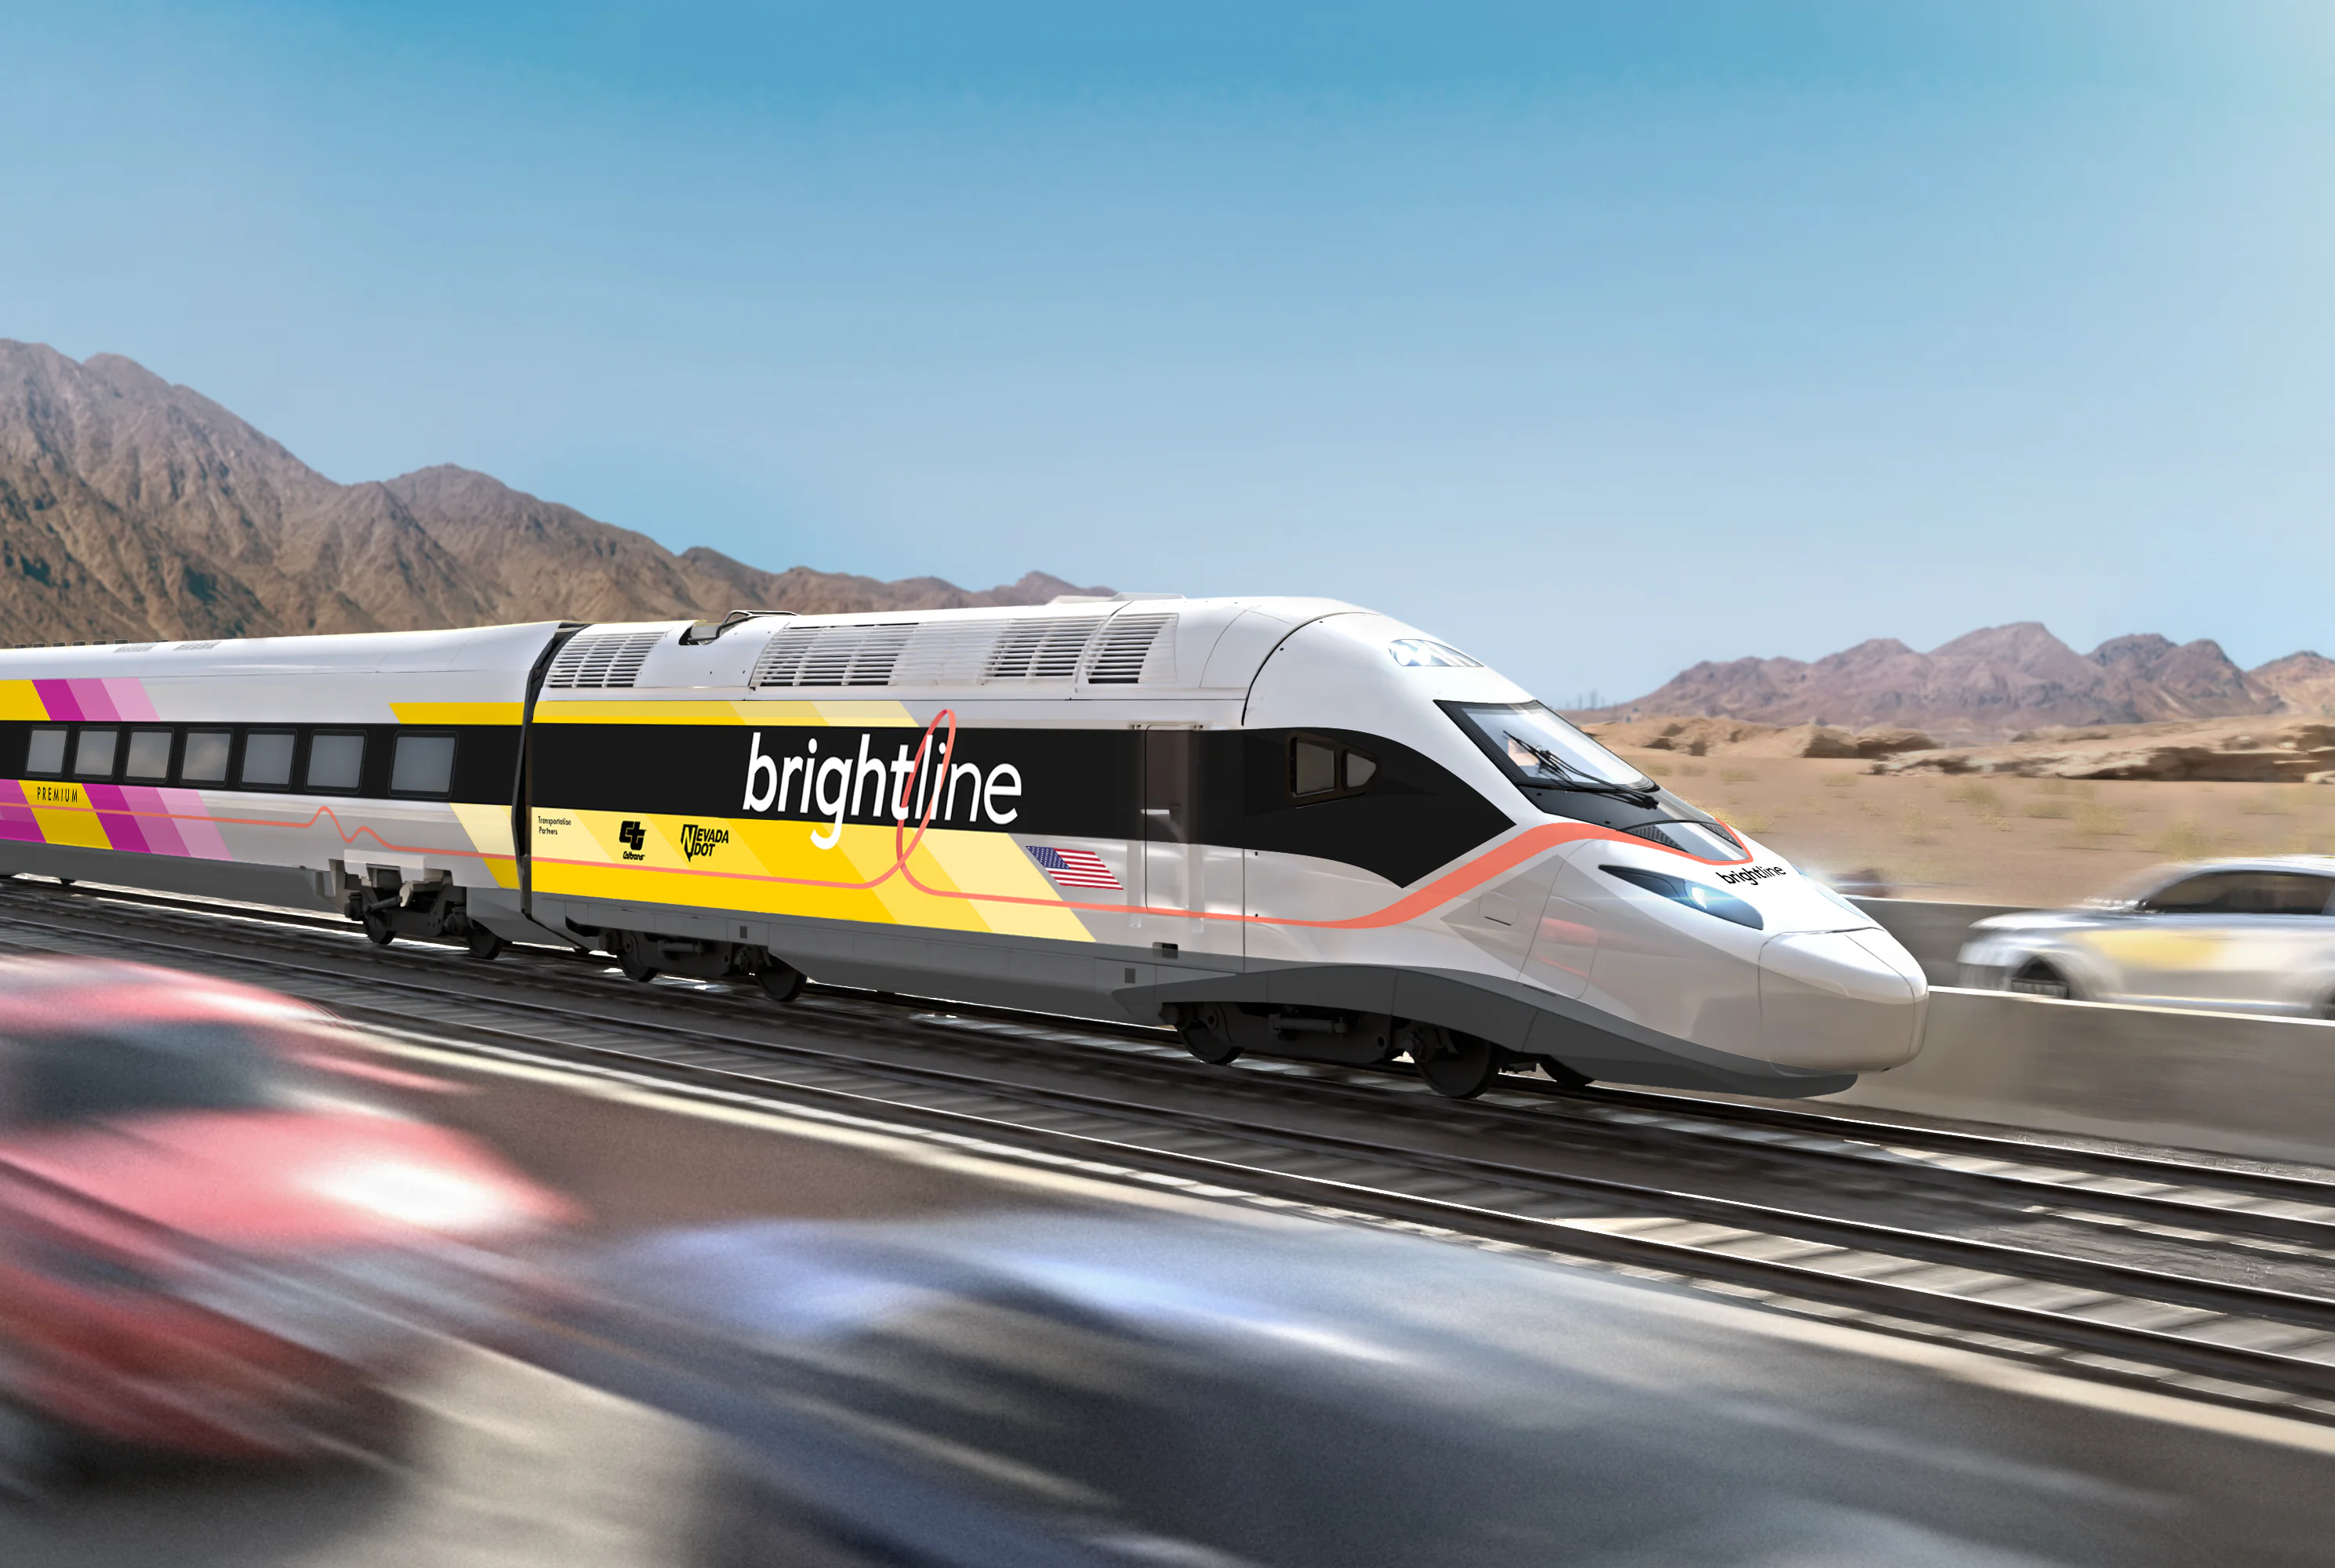 Construction Begins on High-Speed Rail From Southern California to Las Vegas